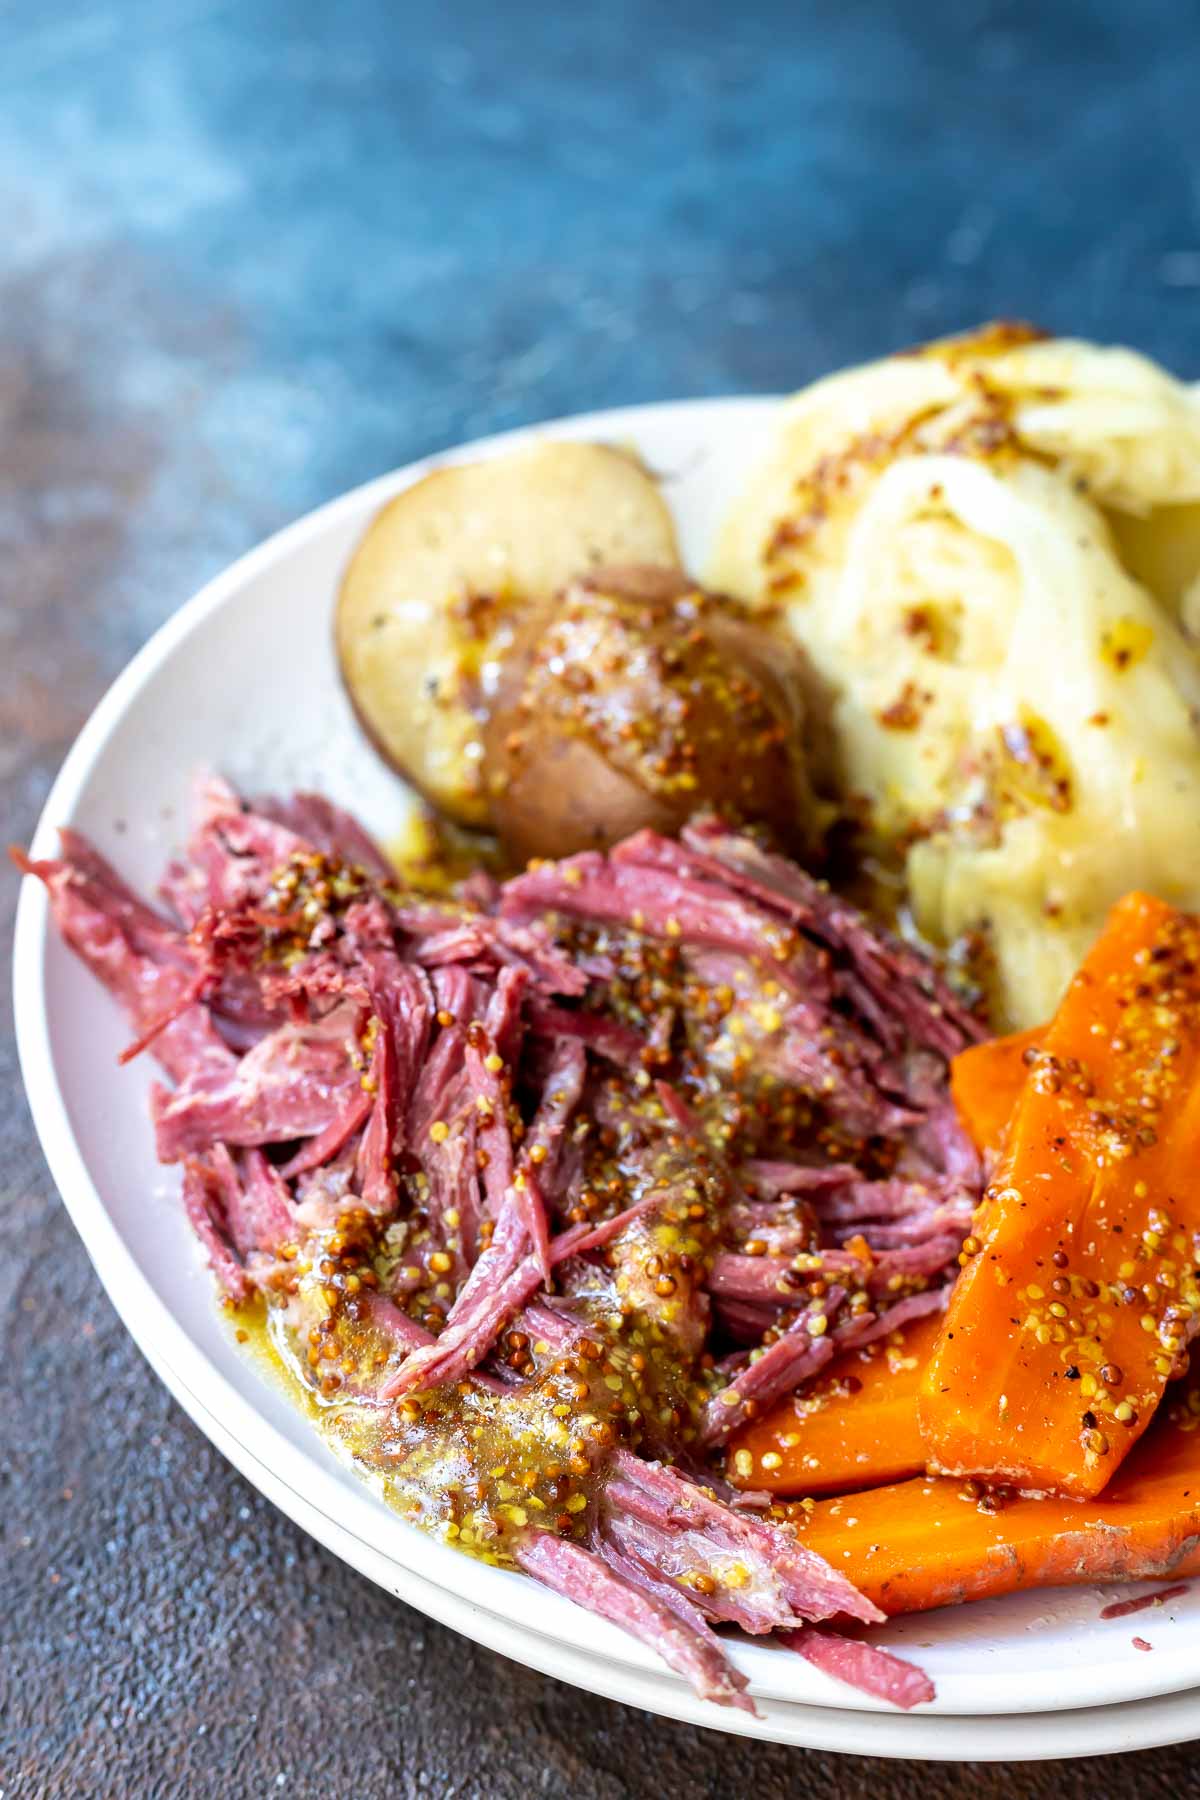 crockpot corned beef and cabbage recipe